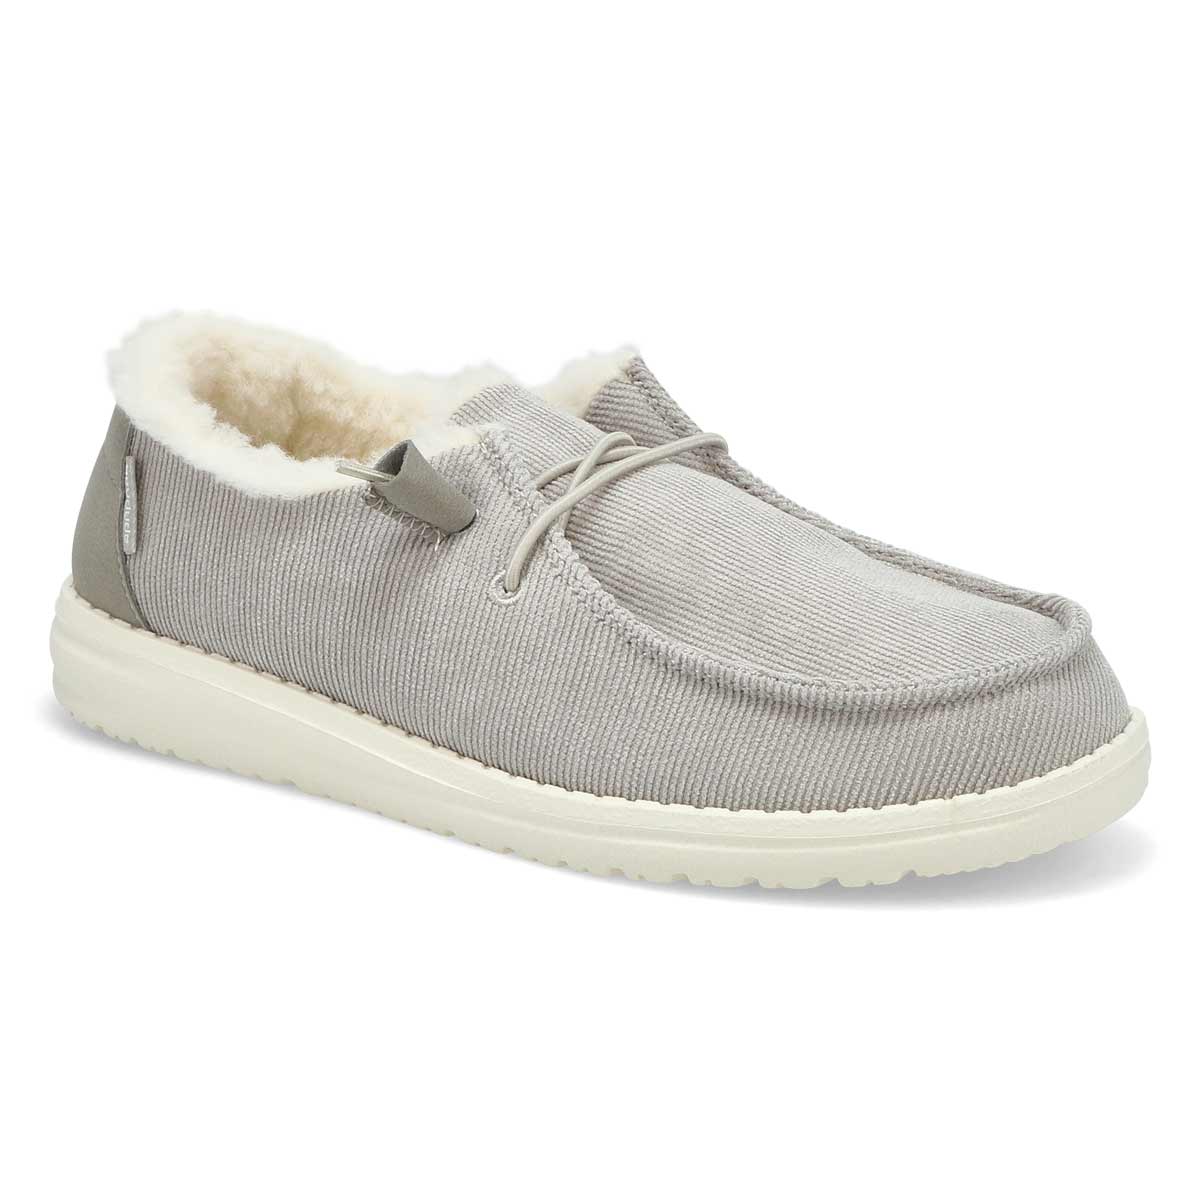 40078 - UGG shearling-trim leather boots Brown, Hey Dude Wendy Sox Stone  Women's Casual Shoe White